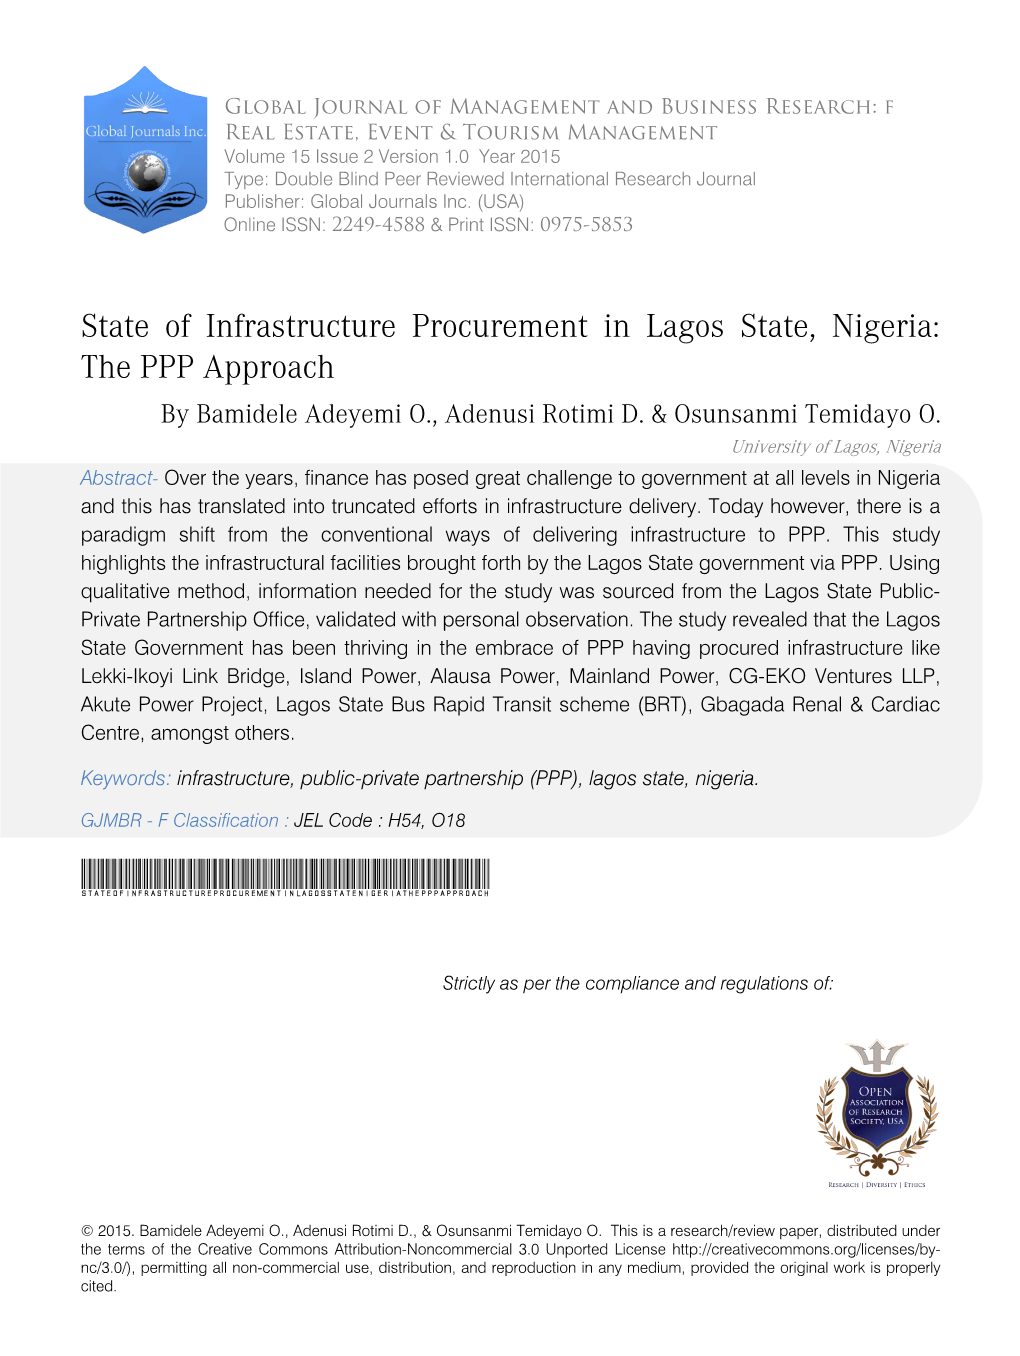 State of Infrastructure Procurement in Lagos State, Nigeria:The PPP